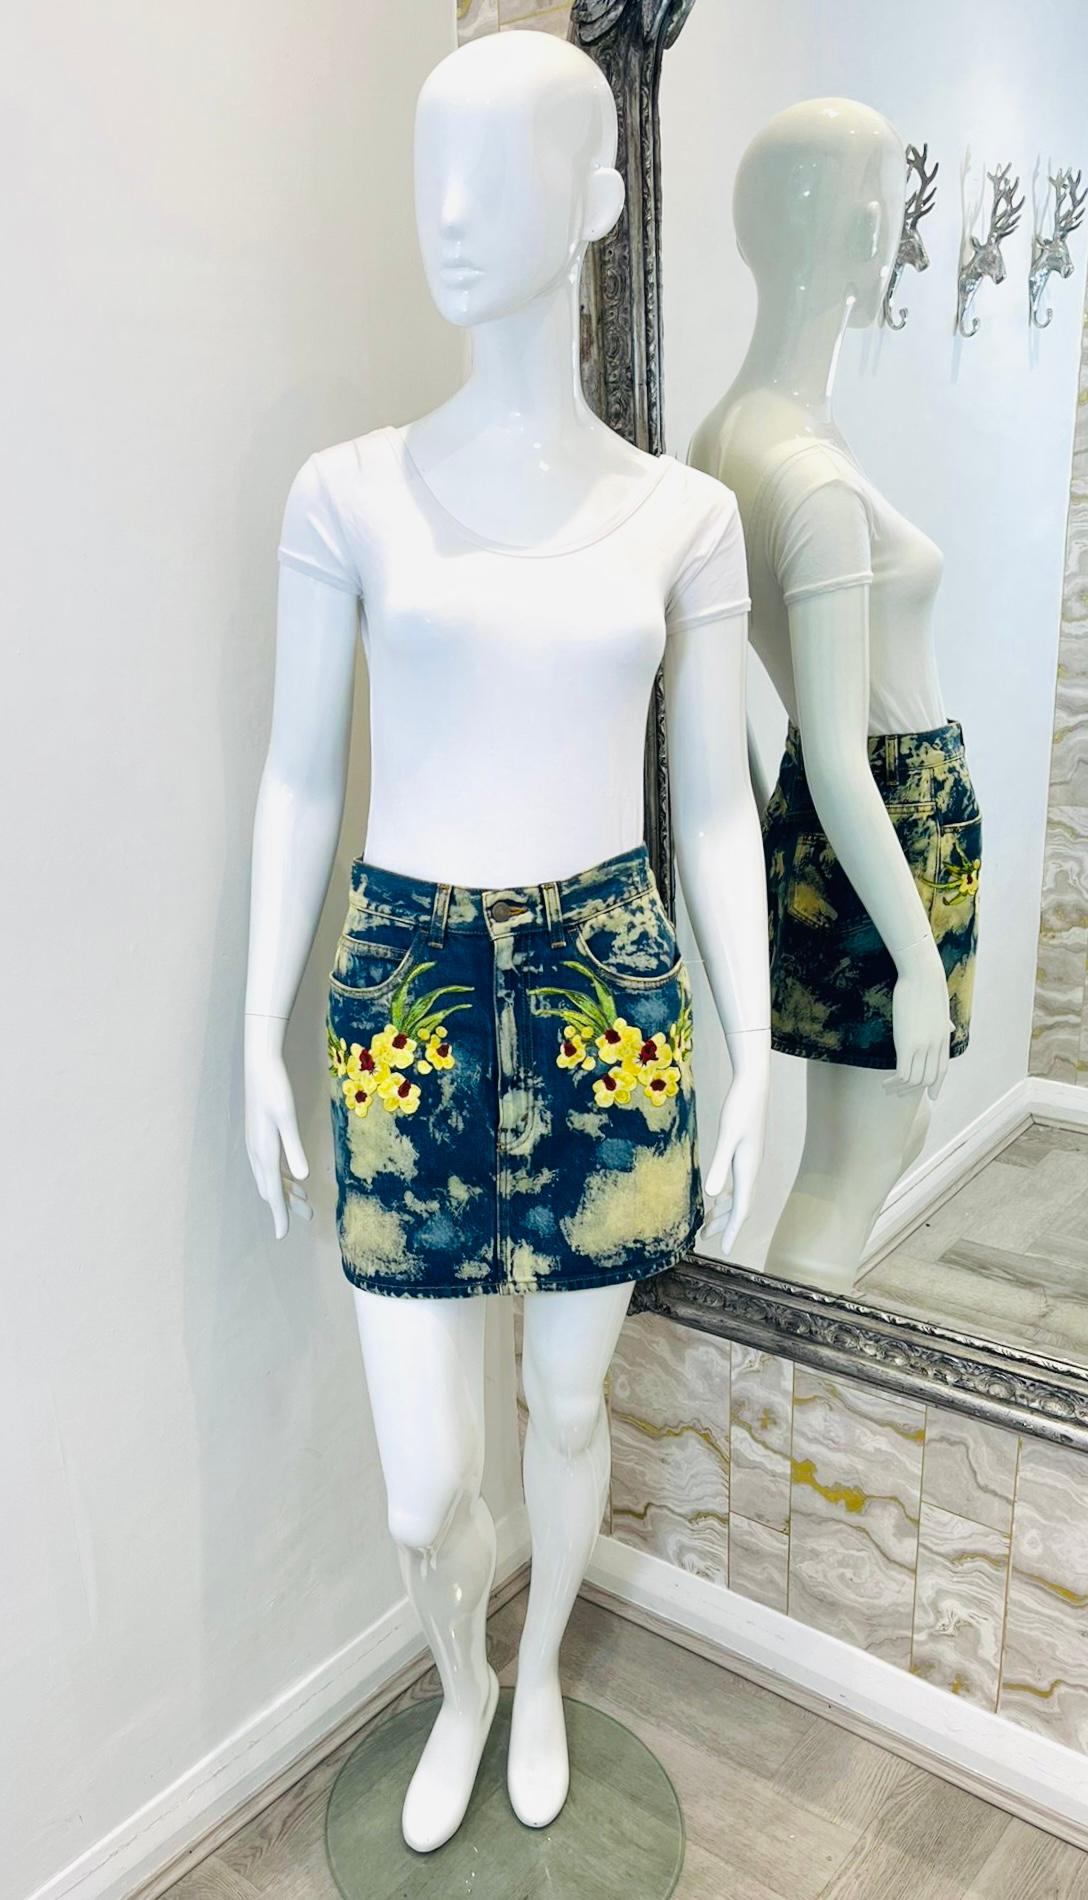 Gucci Denim Cotton Embroidered Skirt

Blue mini skirt detailed with bleach-dyed effect and yellow floral embroidery to the sides.

Featuring belt loops and five-pocket design with 'Gucci' engraved button closure.

Size – 40IT

Condition – Very